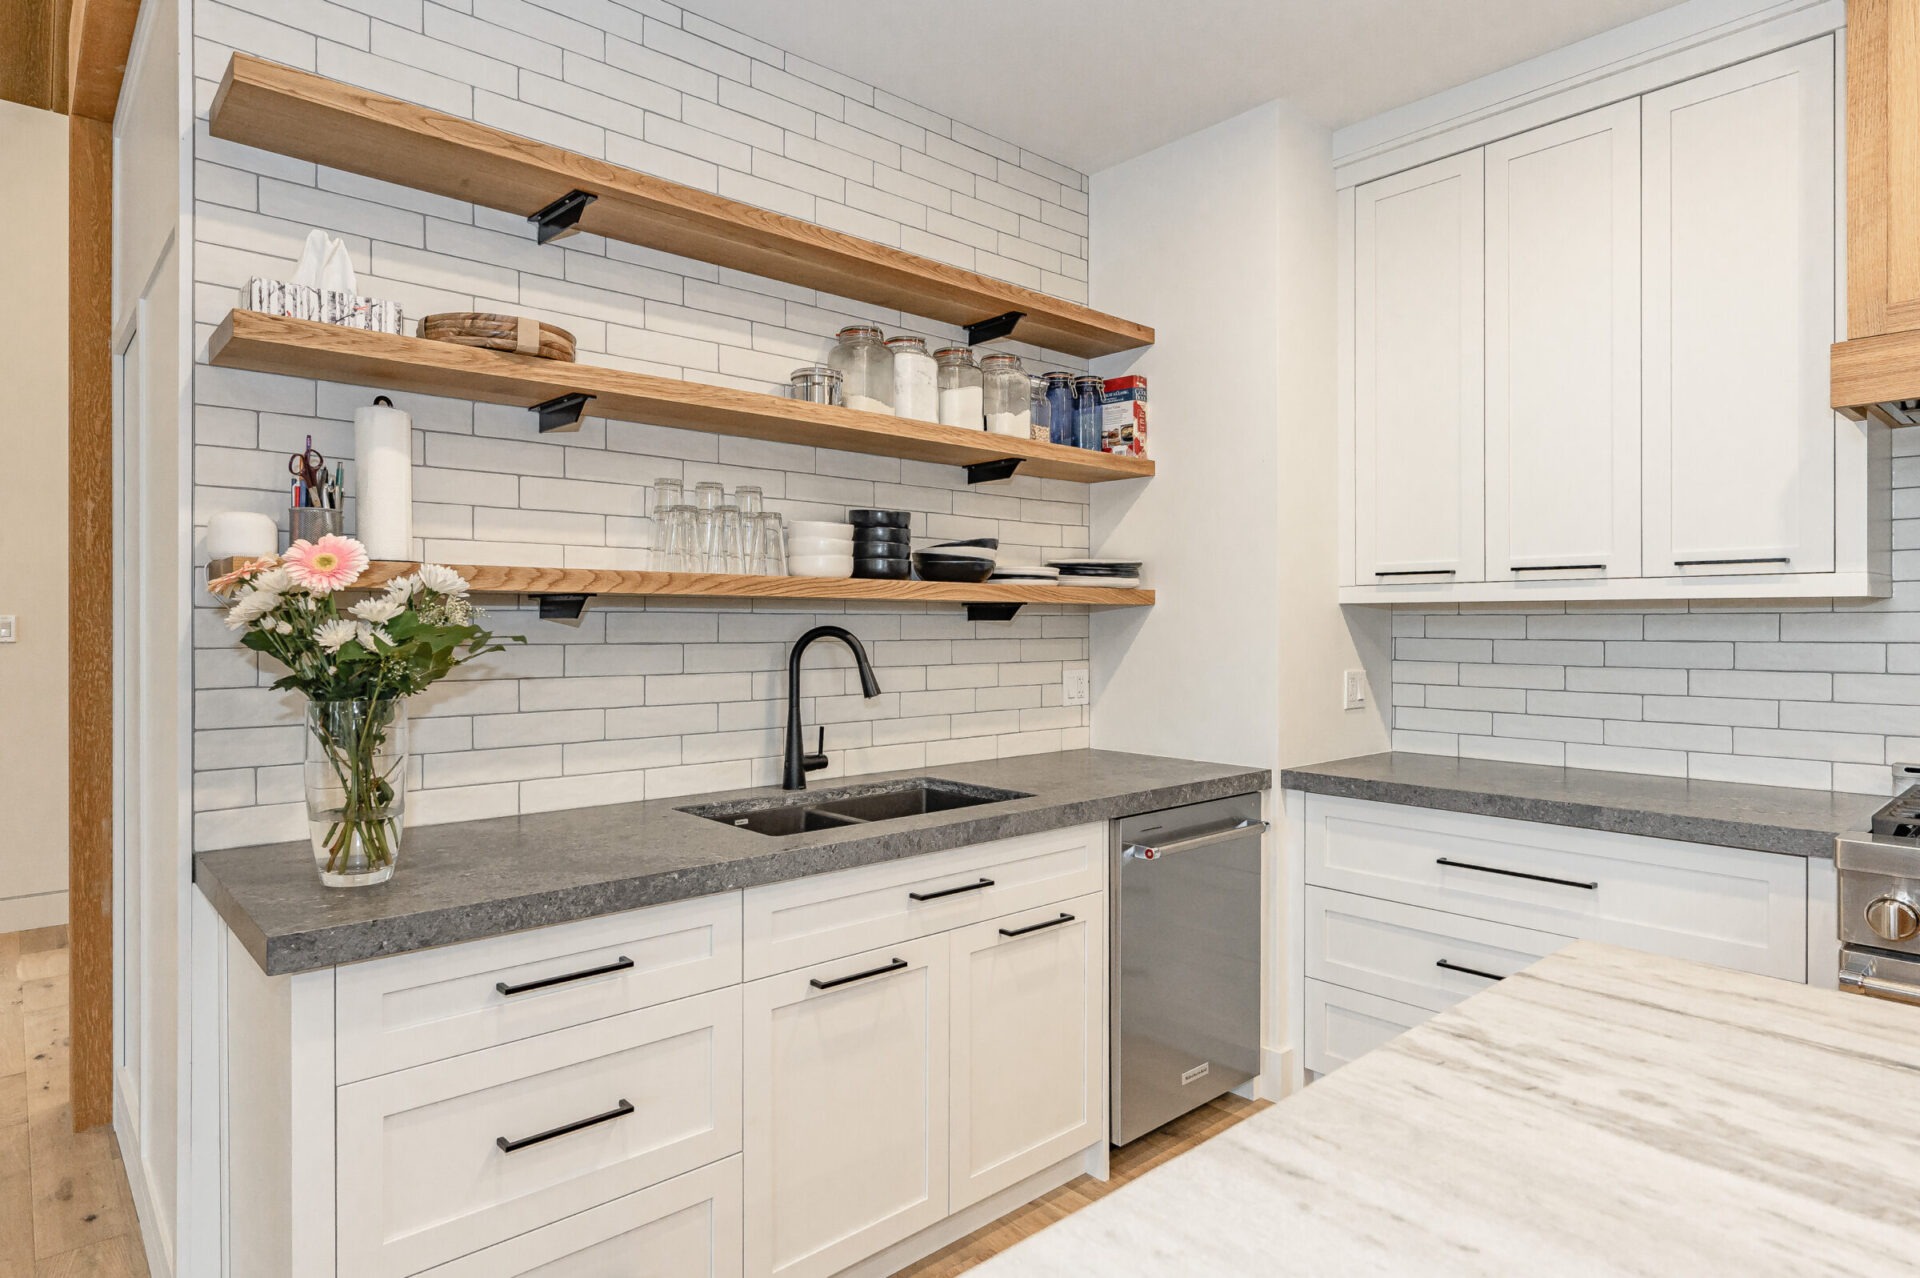 A modern kitchen with white cabinetry, gray countertops, subway tile backsplash, open wooden shelves, and stainless-steel appliances. A vase with flowers adds color.